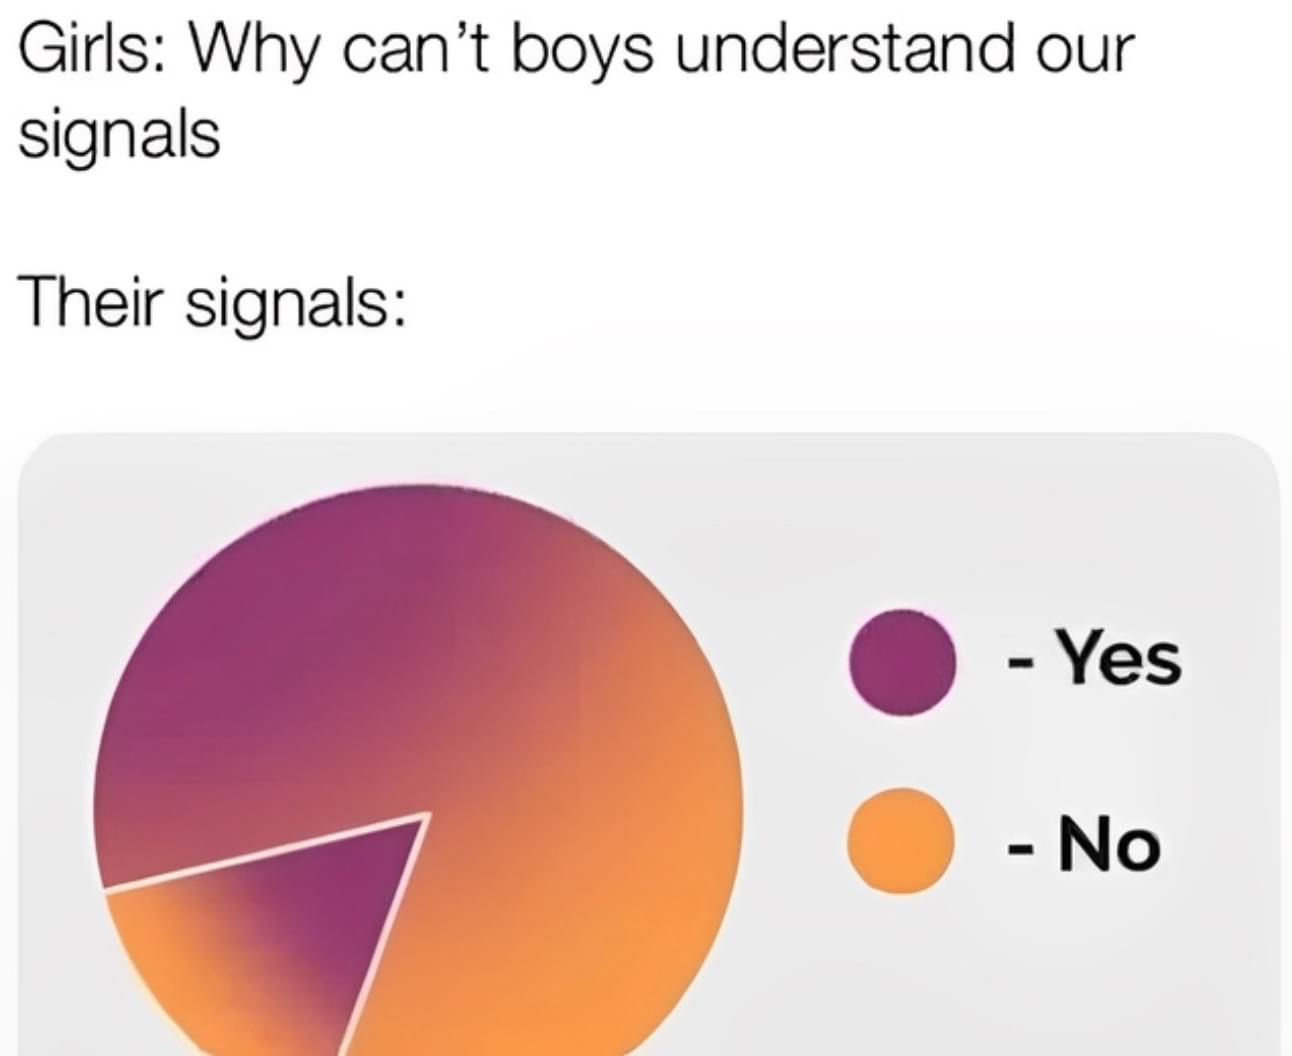 why can’t boys understand our signals, our signals, unclear